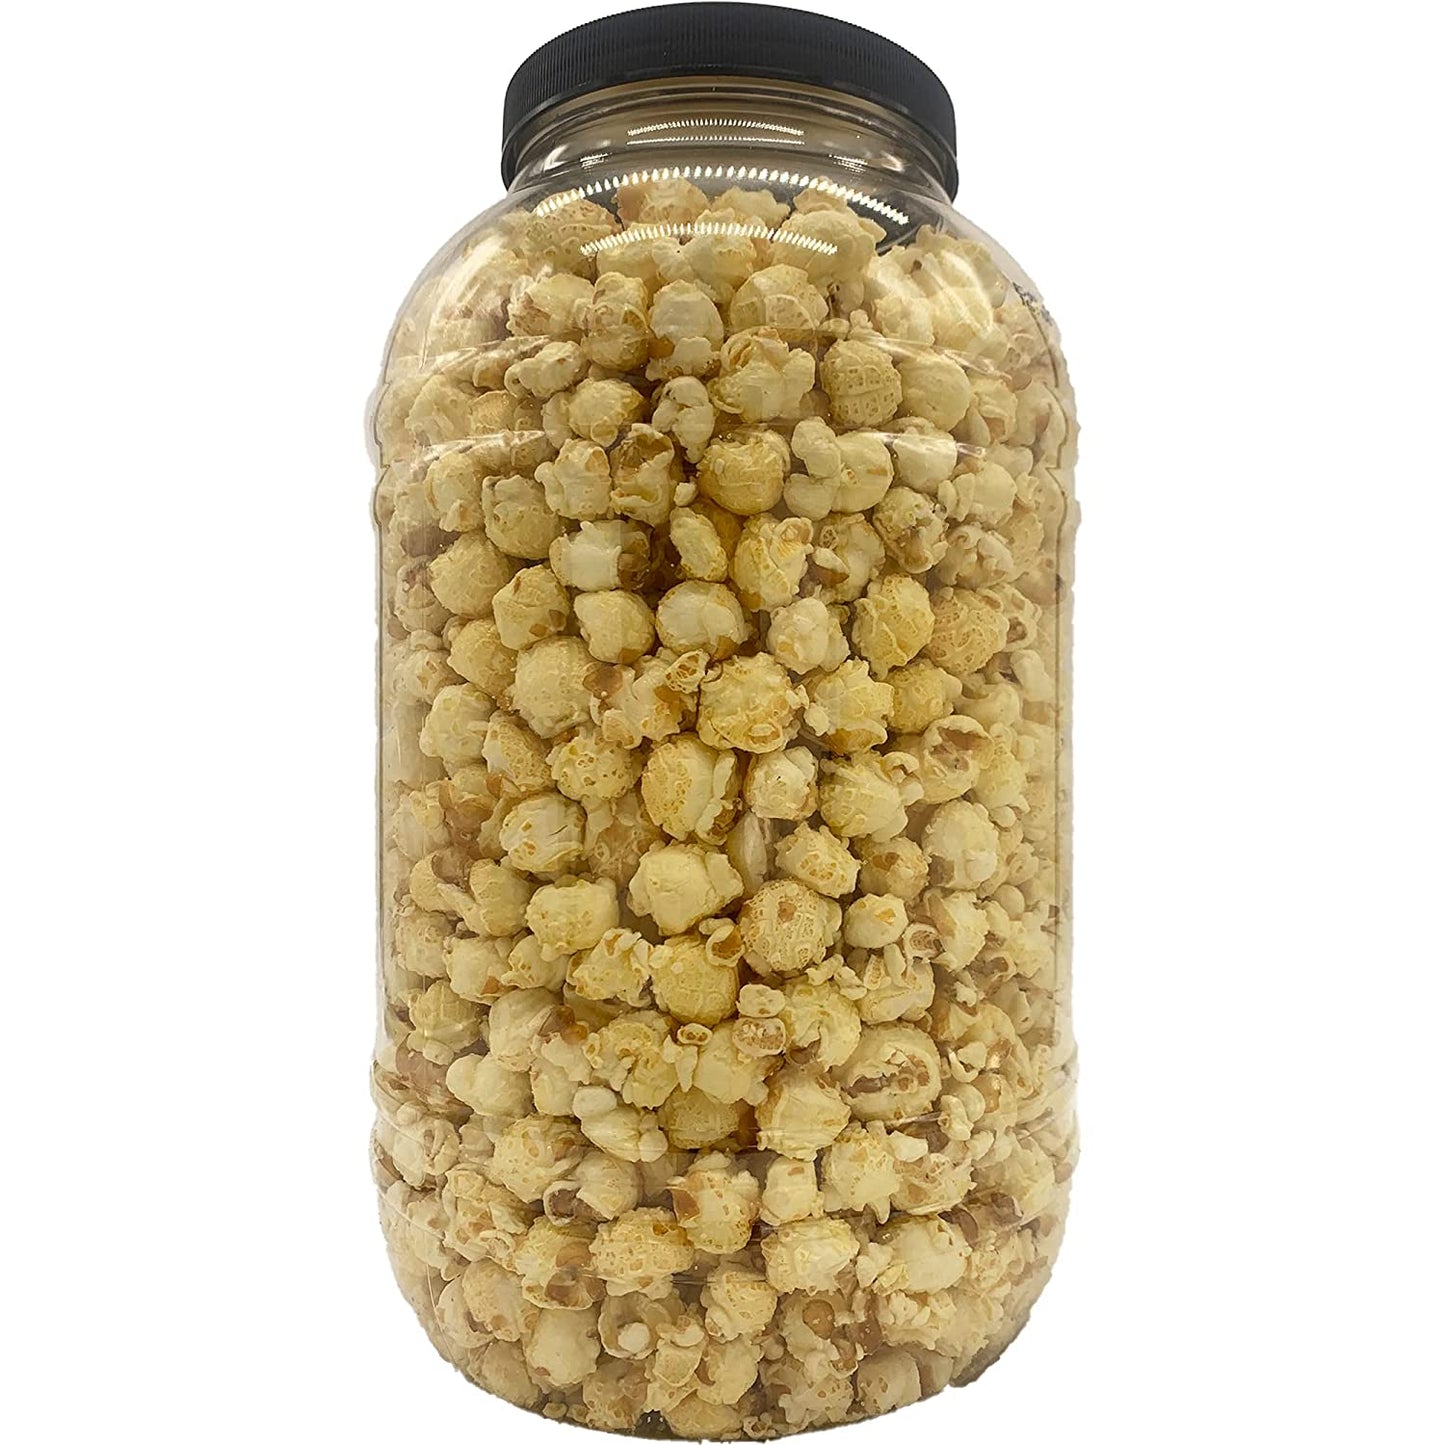 StoneHedge Farms Gourmet Kettle Popcorn - Deliciously Old Fashioned 32 Oz. Tall Tub! - Made in the USA! (Kettle Corn Crunch)